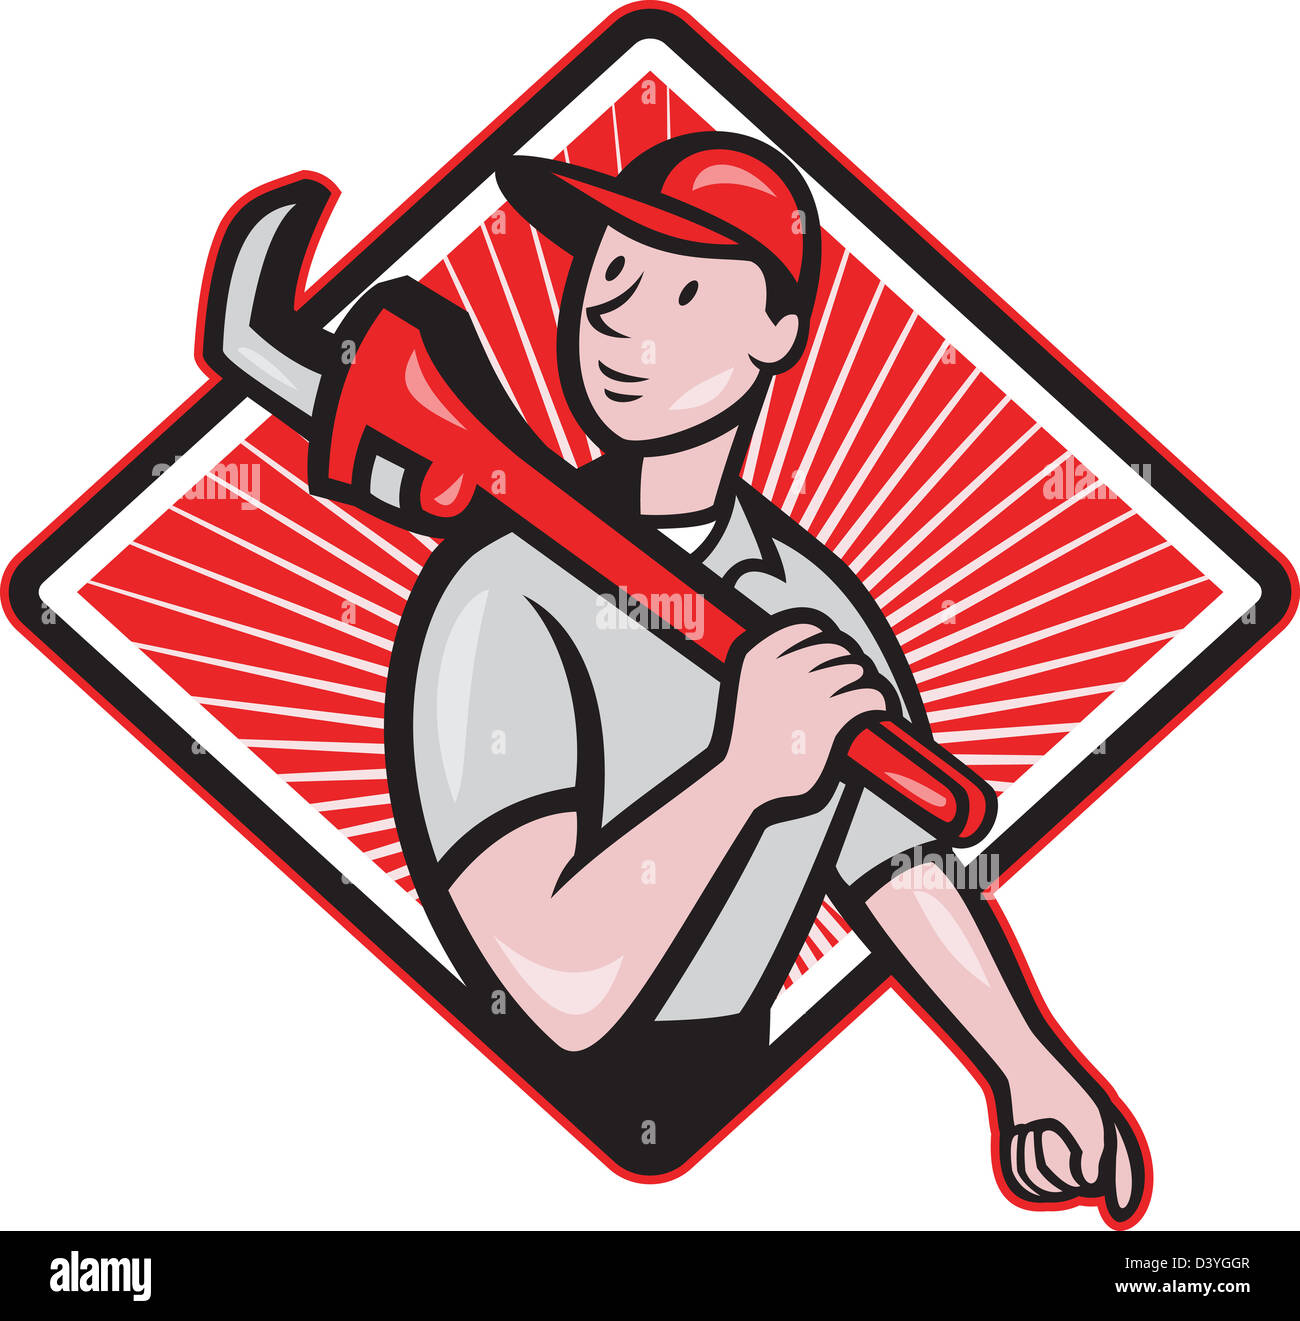 Illustration of a plumber with monkey wrench done in cartoon style on isolated background Stock Photo